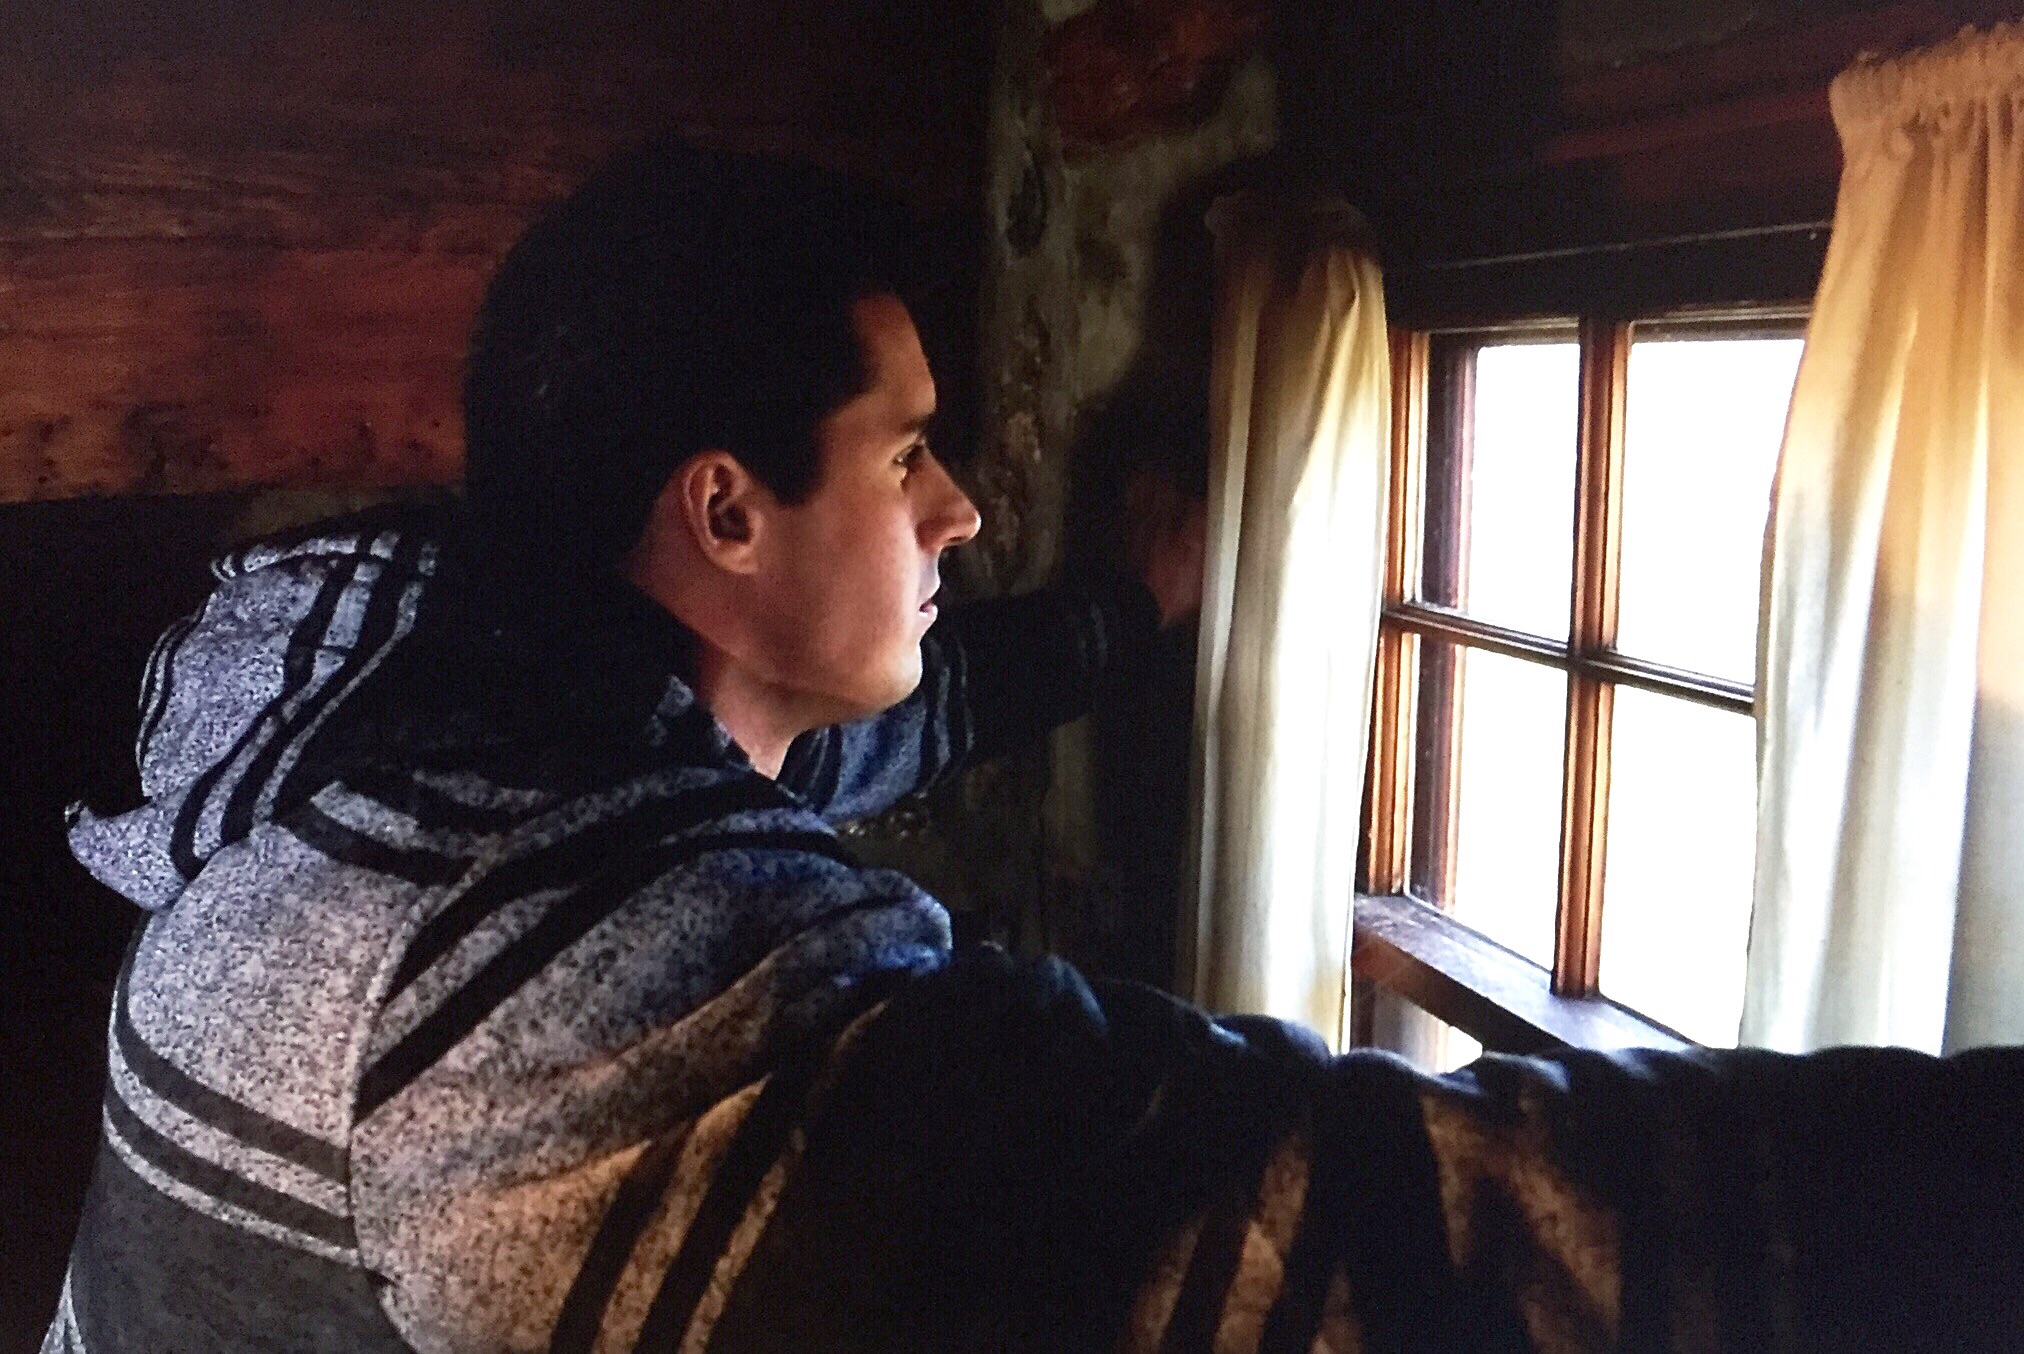 Behind the scenes photo of Keegan taking a moment to peer out the window and look at the stunning landscape.